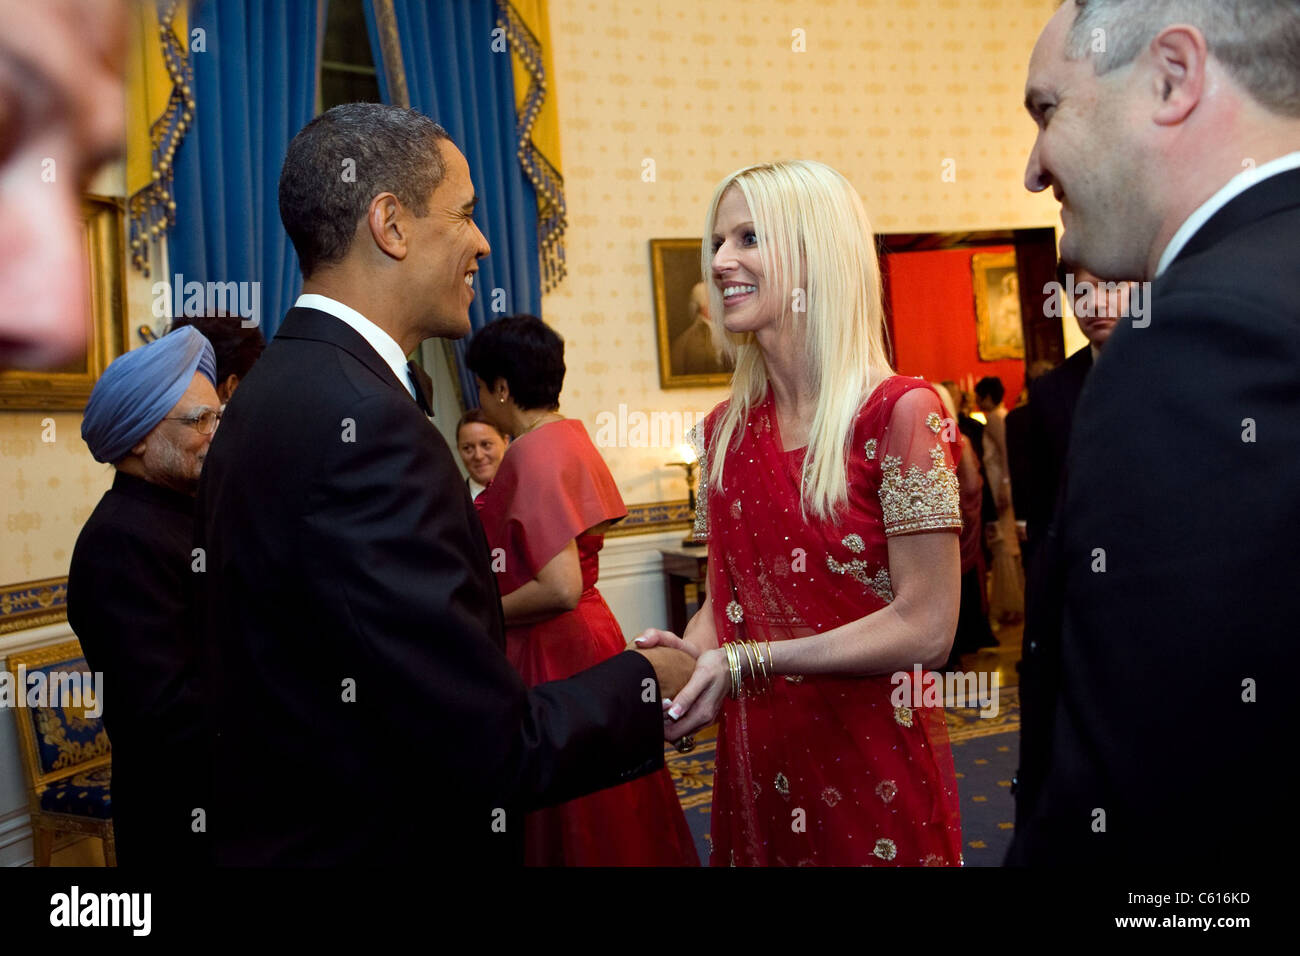 President Obama greets party crashers Michaele and Tareq Salahi in a receiving line in the Blue Room before the State Dinner with Prime Minister Manmohan Singh of India Nov. 24 2009., Photo by: Everett Collection(BSLOC 2011 7 33) Stock Photo